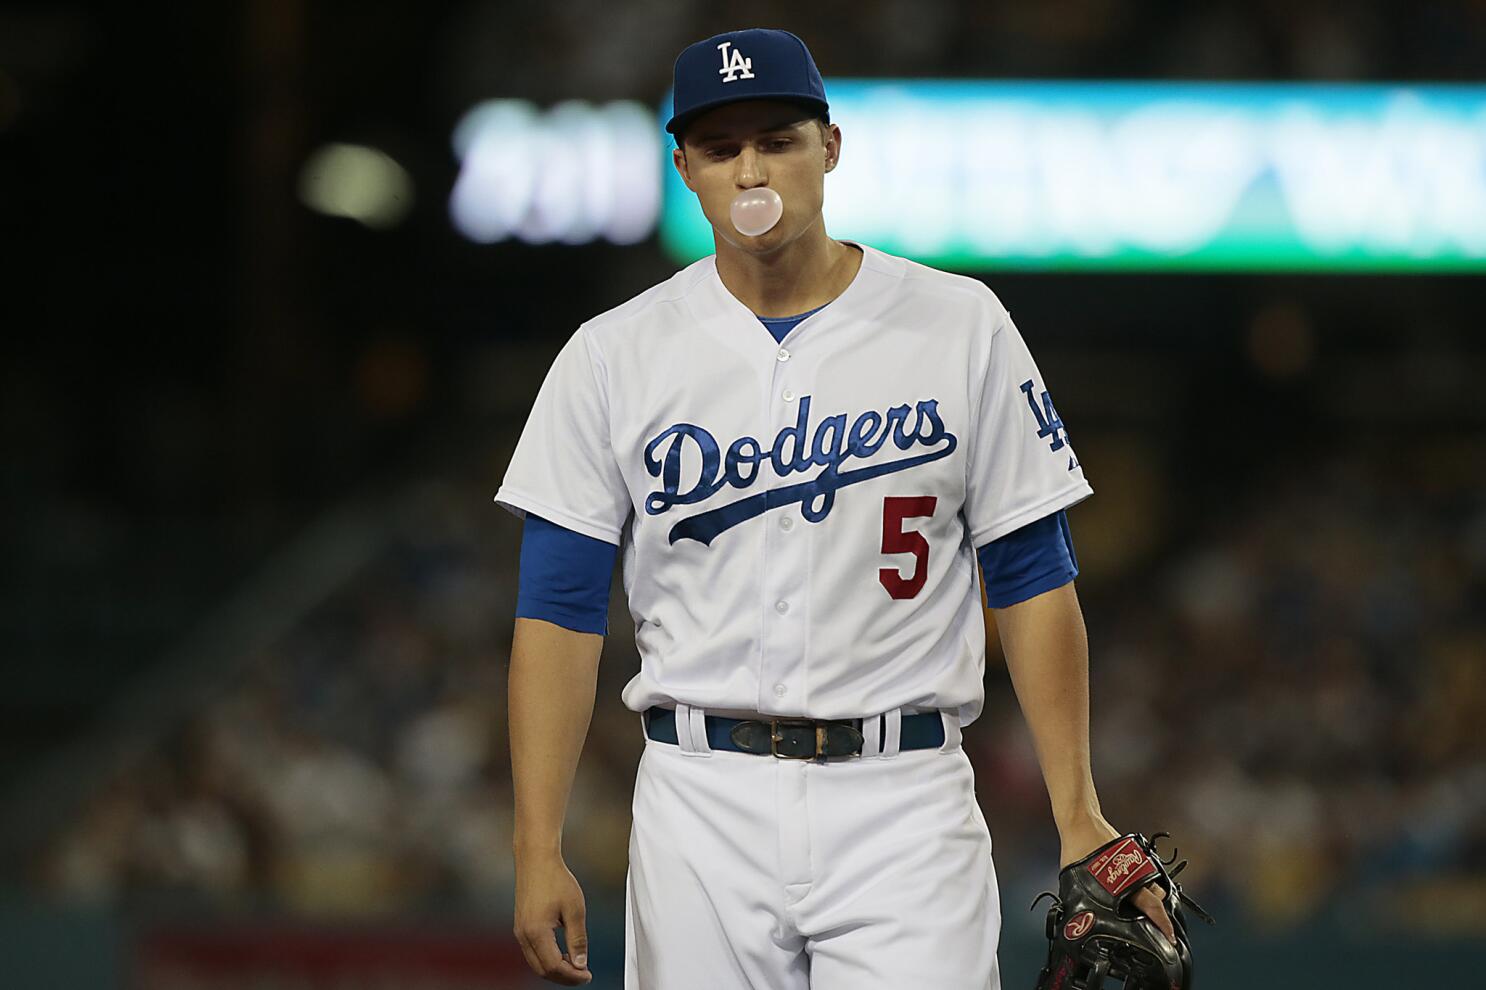 Seager brings great expectations to LA